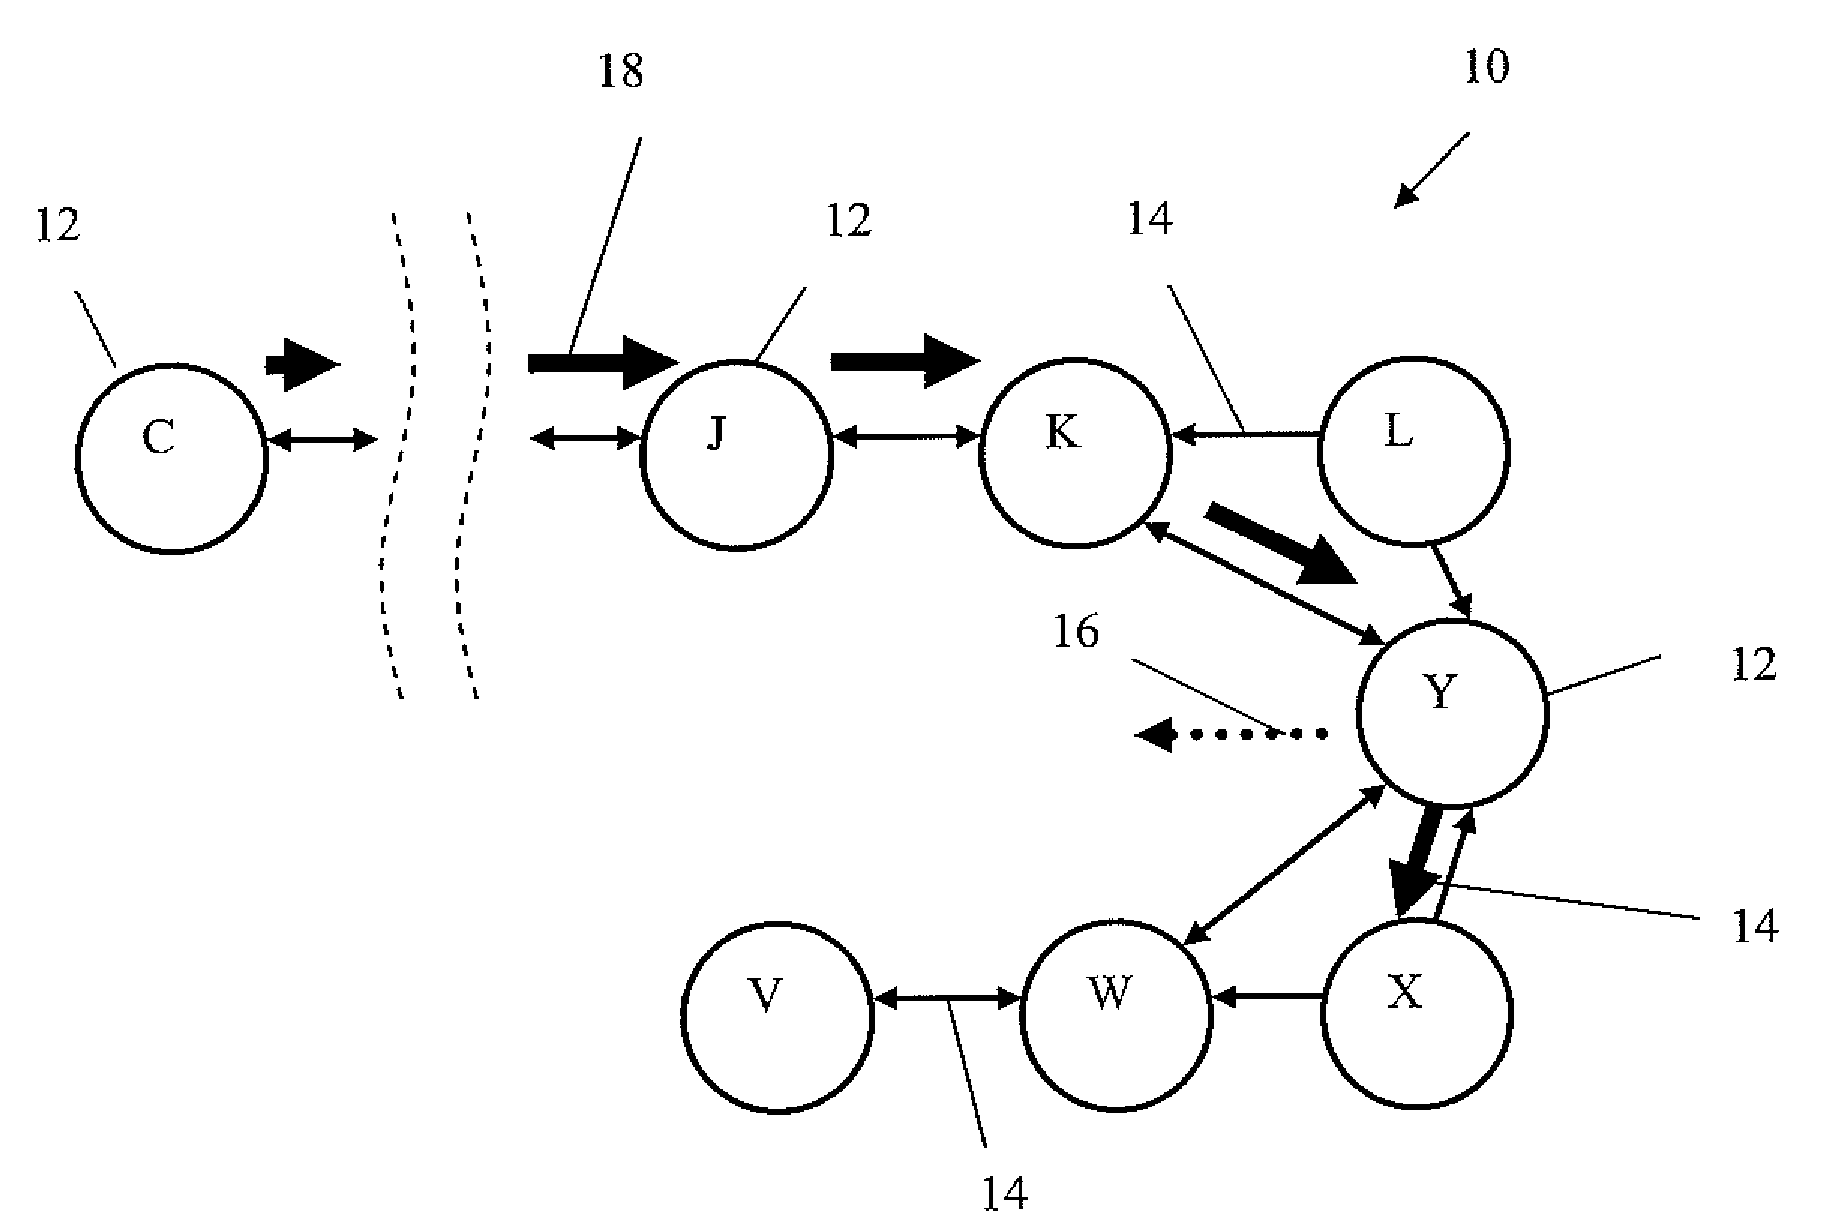 Ad-hoc network routing protocol including the use of forward and reverse multi-point relay (MPR) spanning tree routes